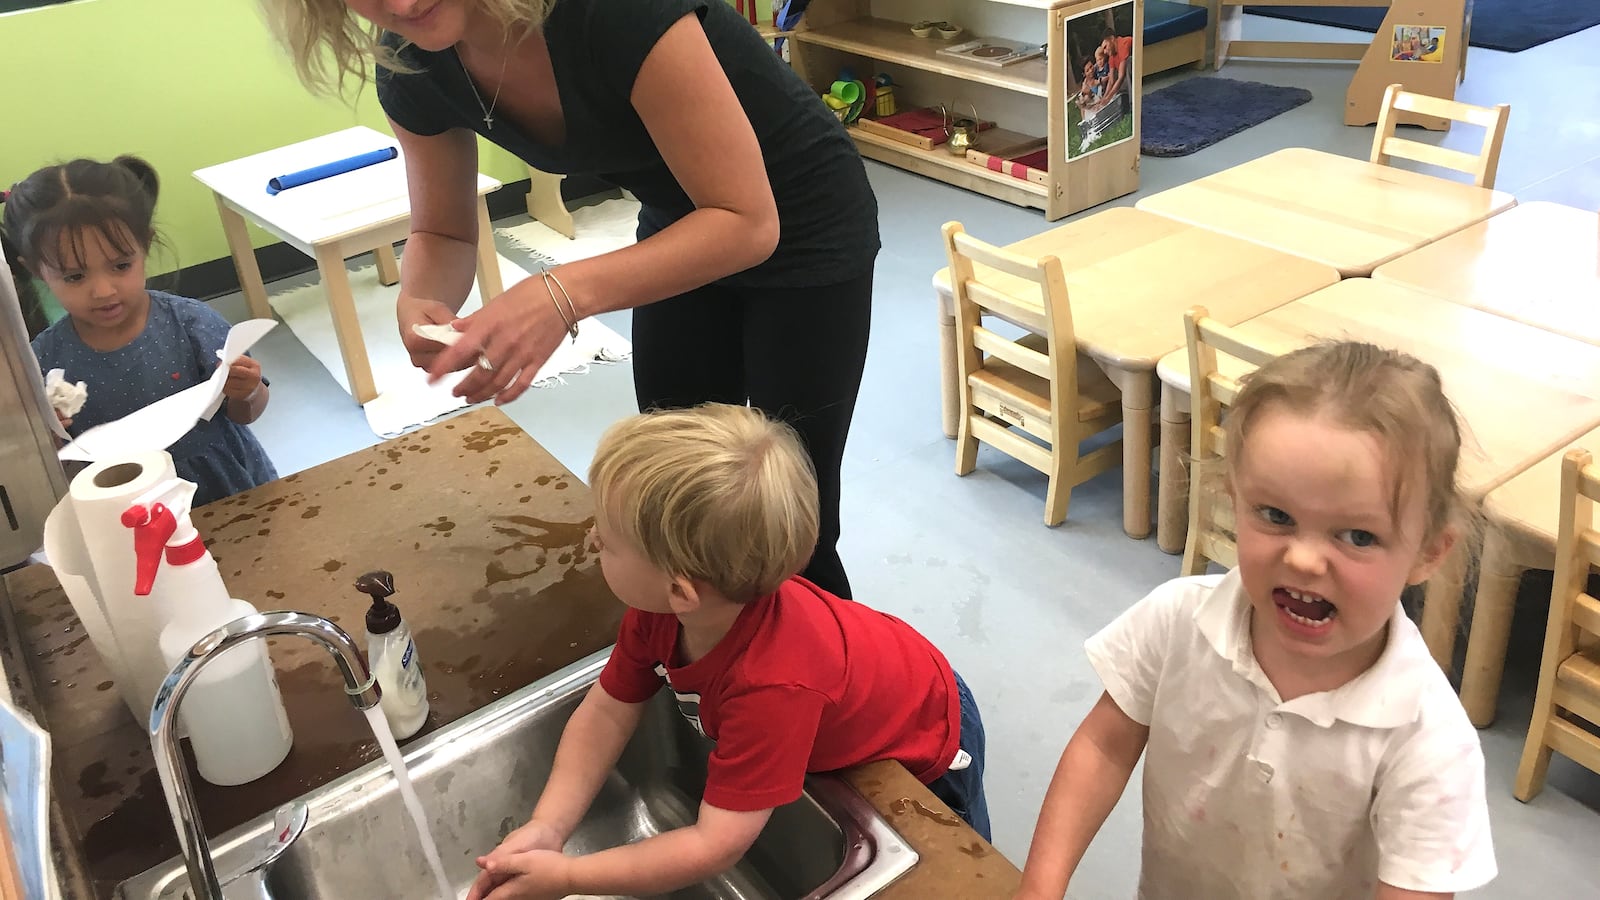 Malanna Newell is a toddler teacher at the Mile High Early Learning center in Denver's Westwood neighborhood. She started as a teaching assistant before taking Mile High's Child Development Associate training last fall.